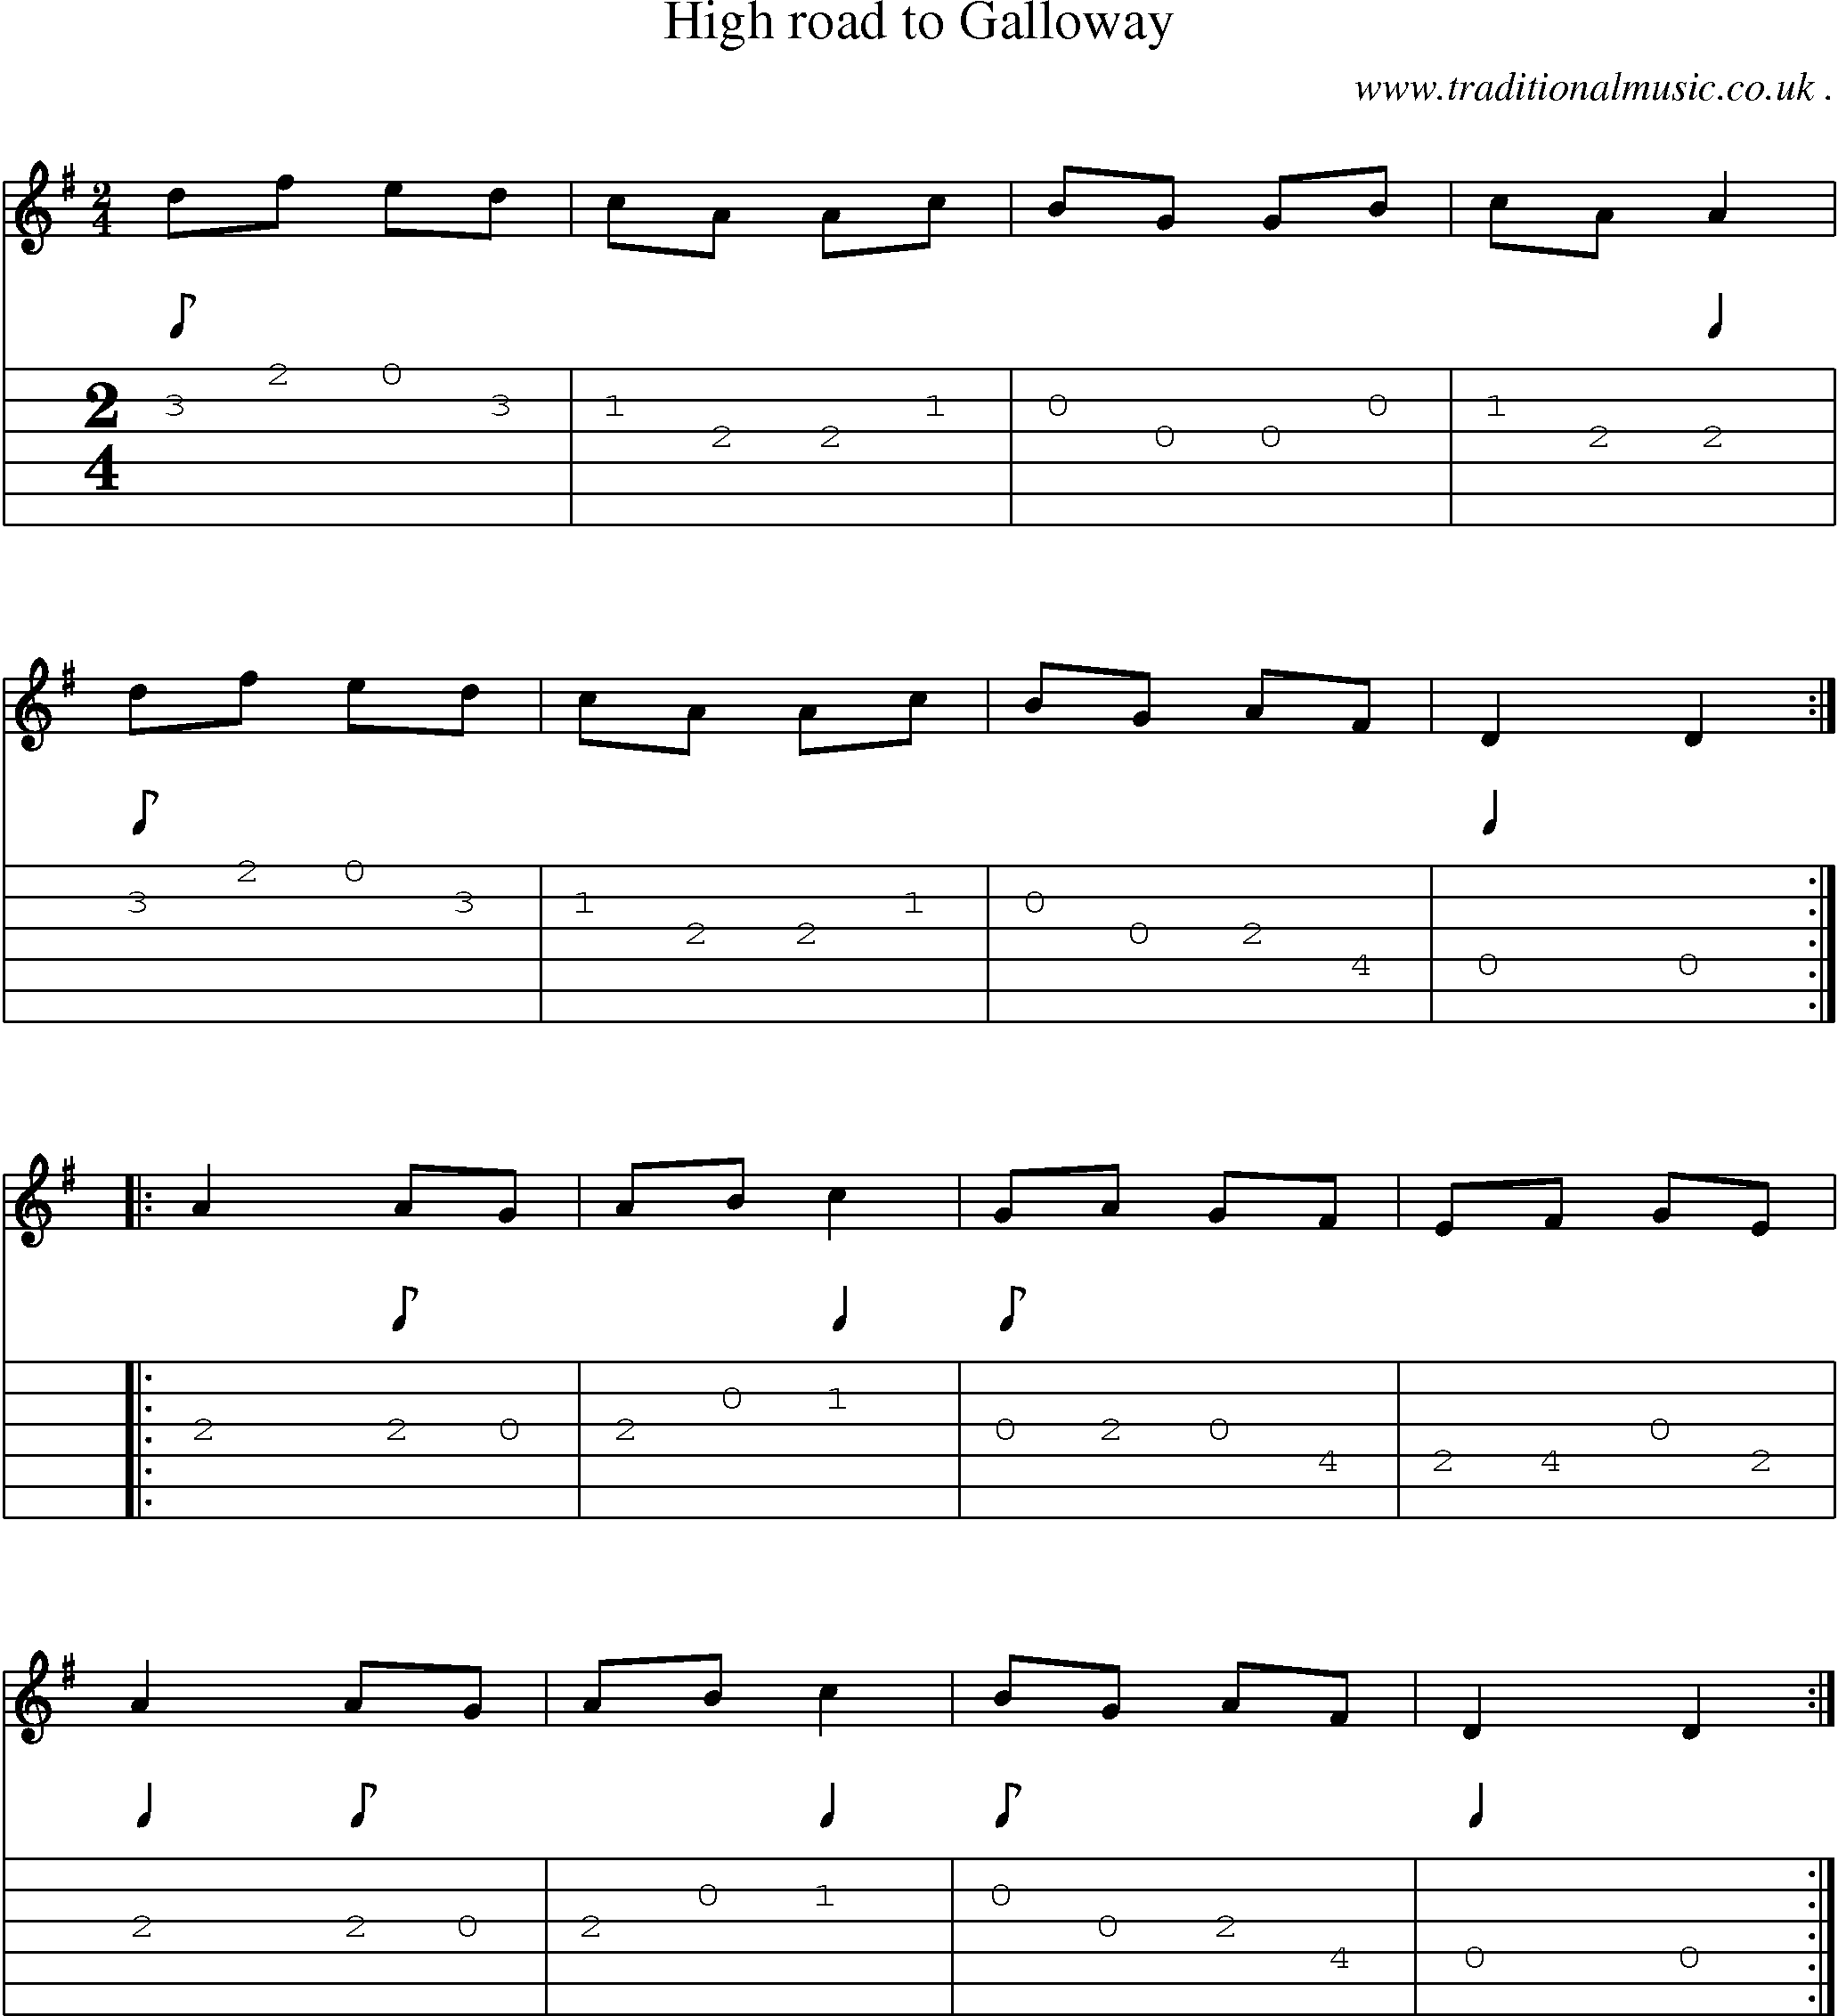 Sheet-Music and Guitar Tabs for High road to Galloway 